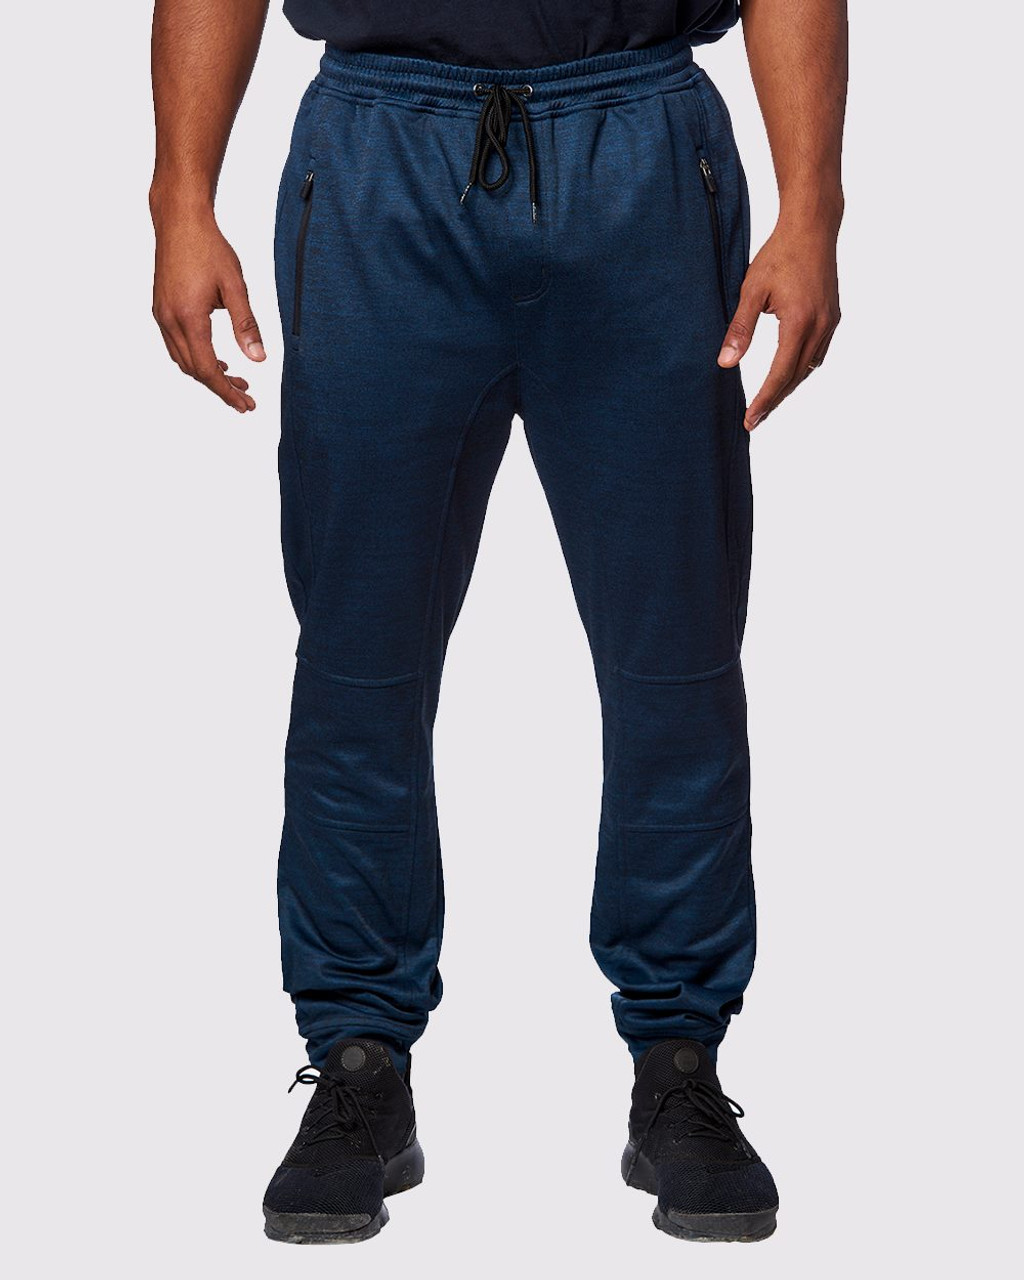 Embroidered Performance Fleece Joggers - 8801